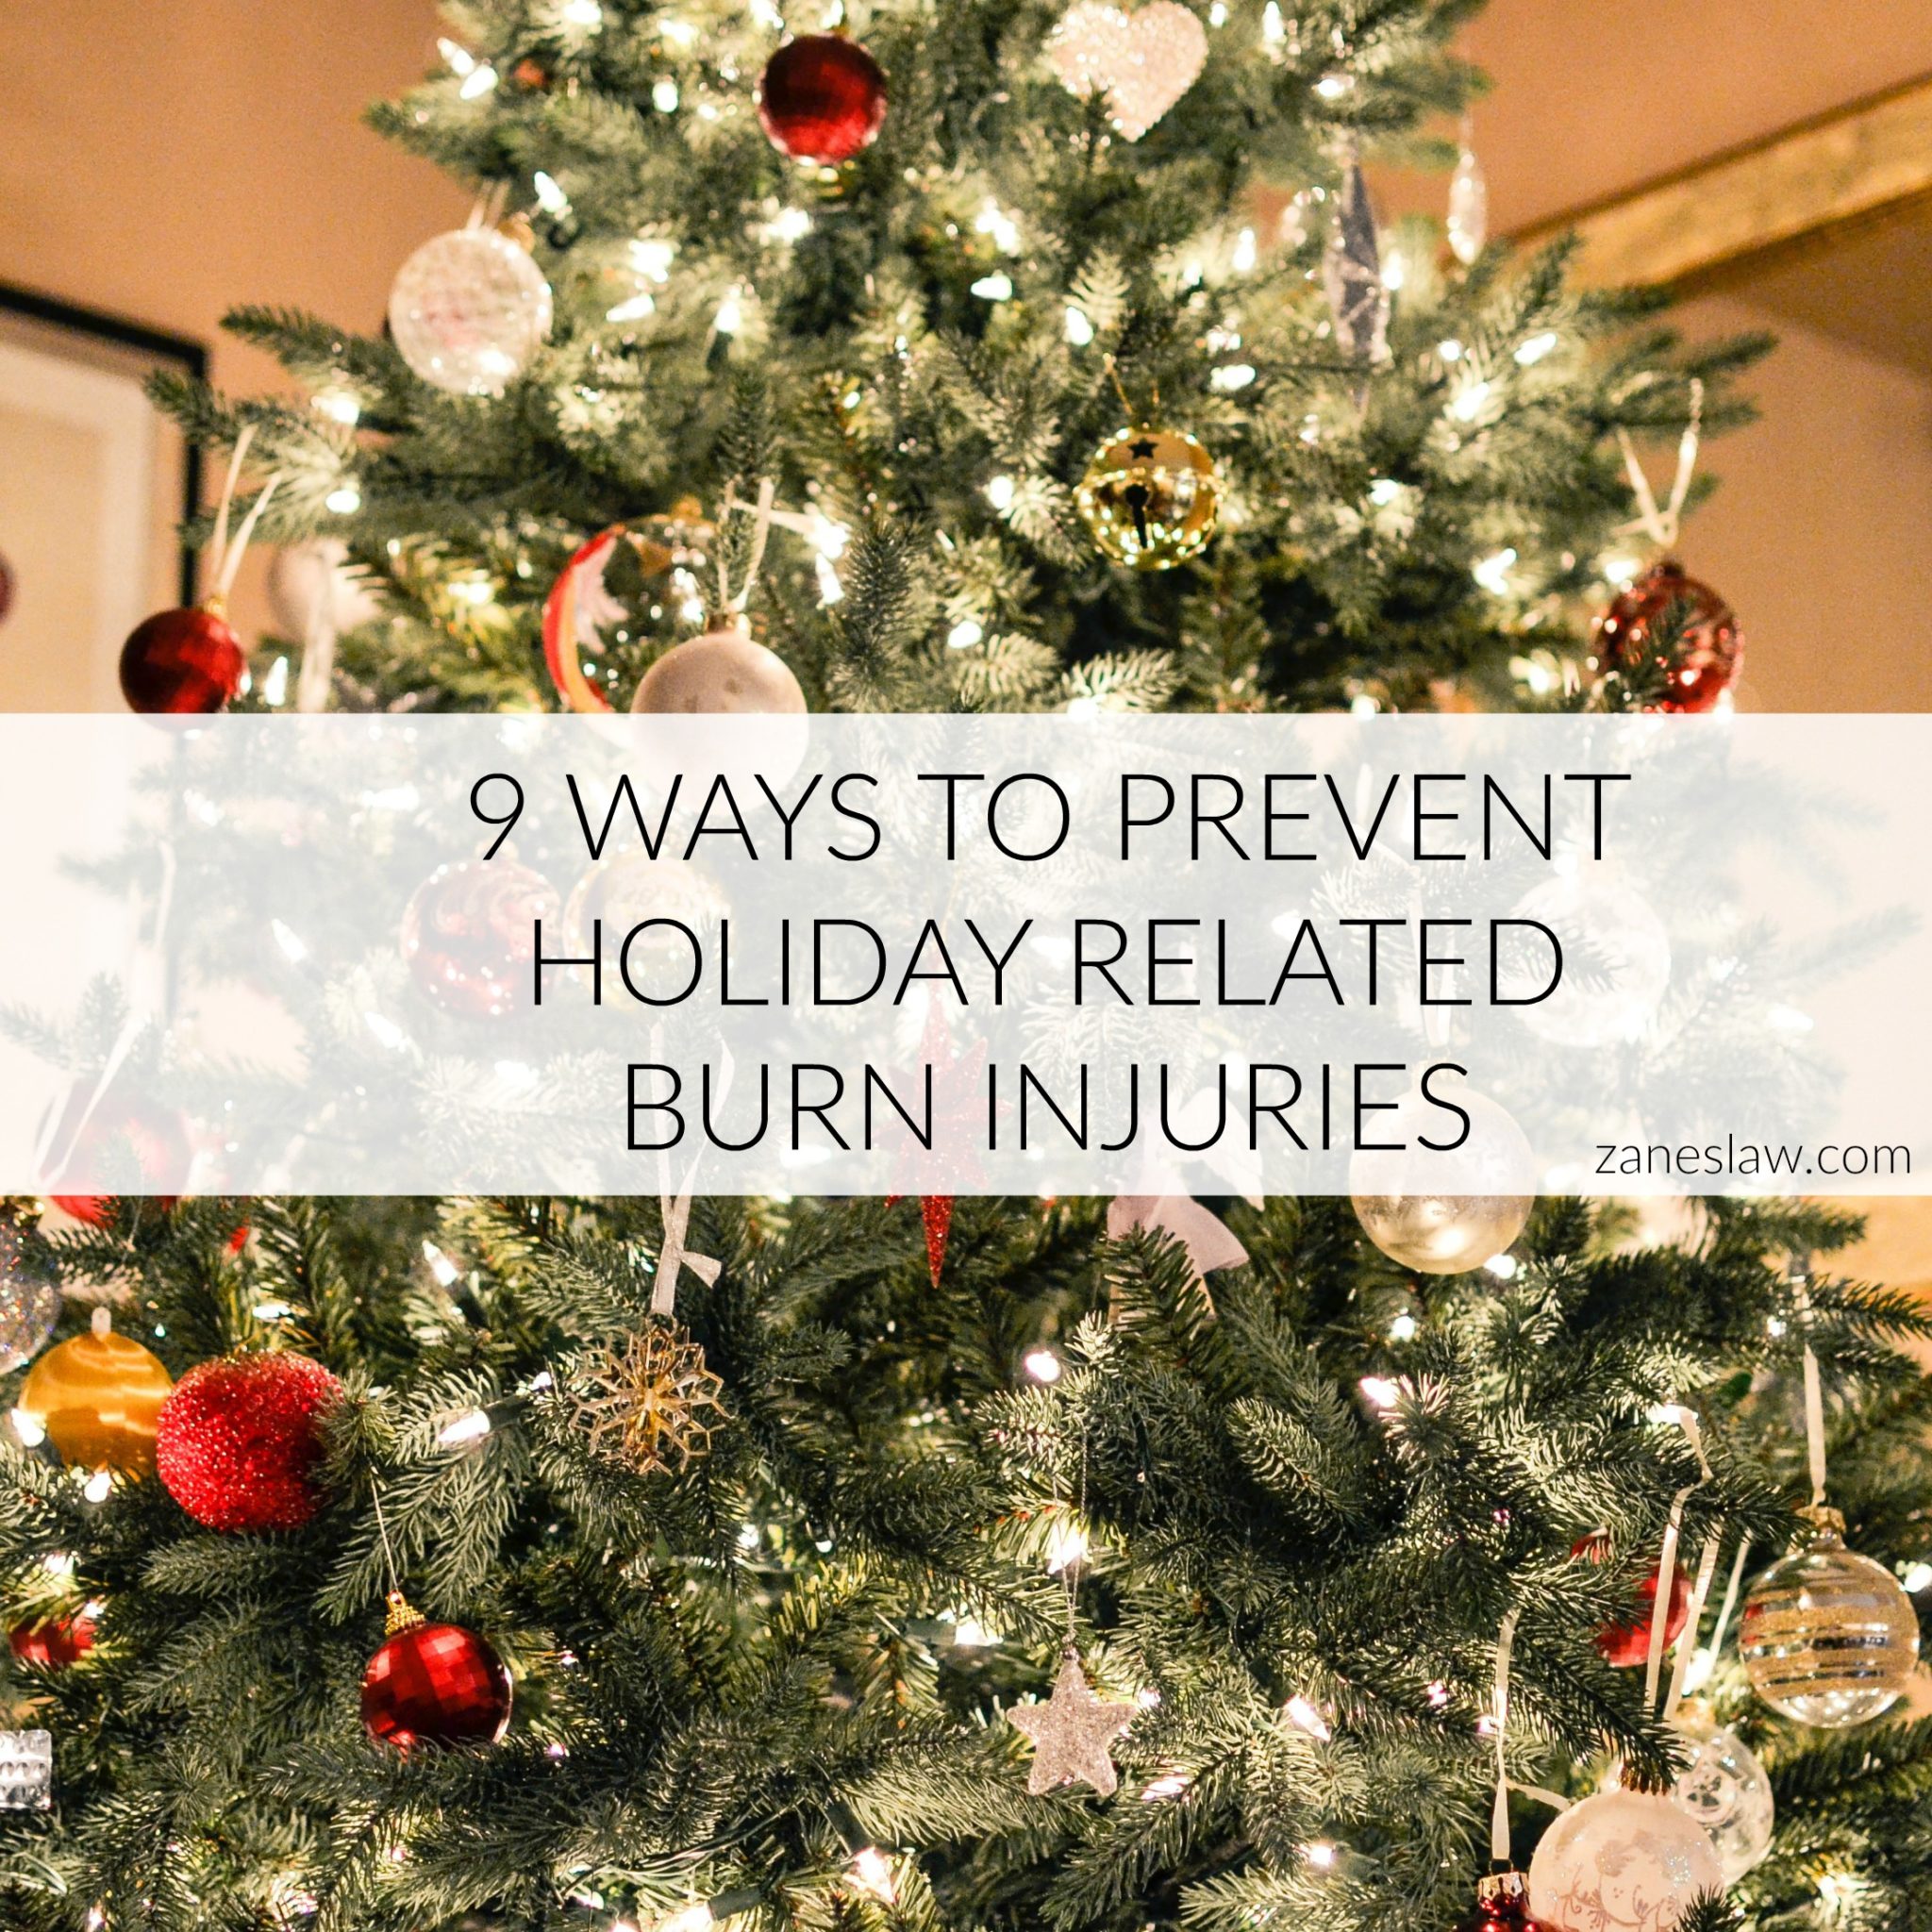 Prevent Holiday Related Burn Injuries